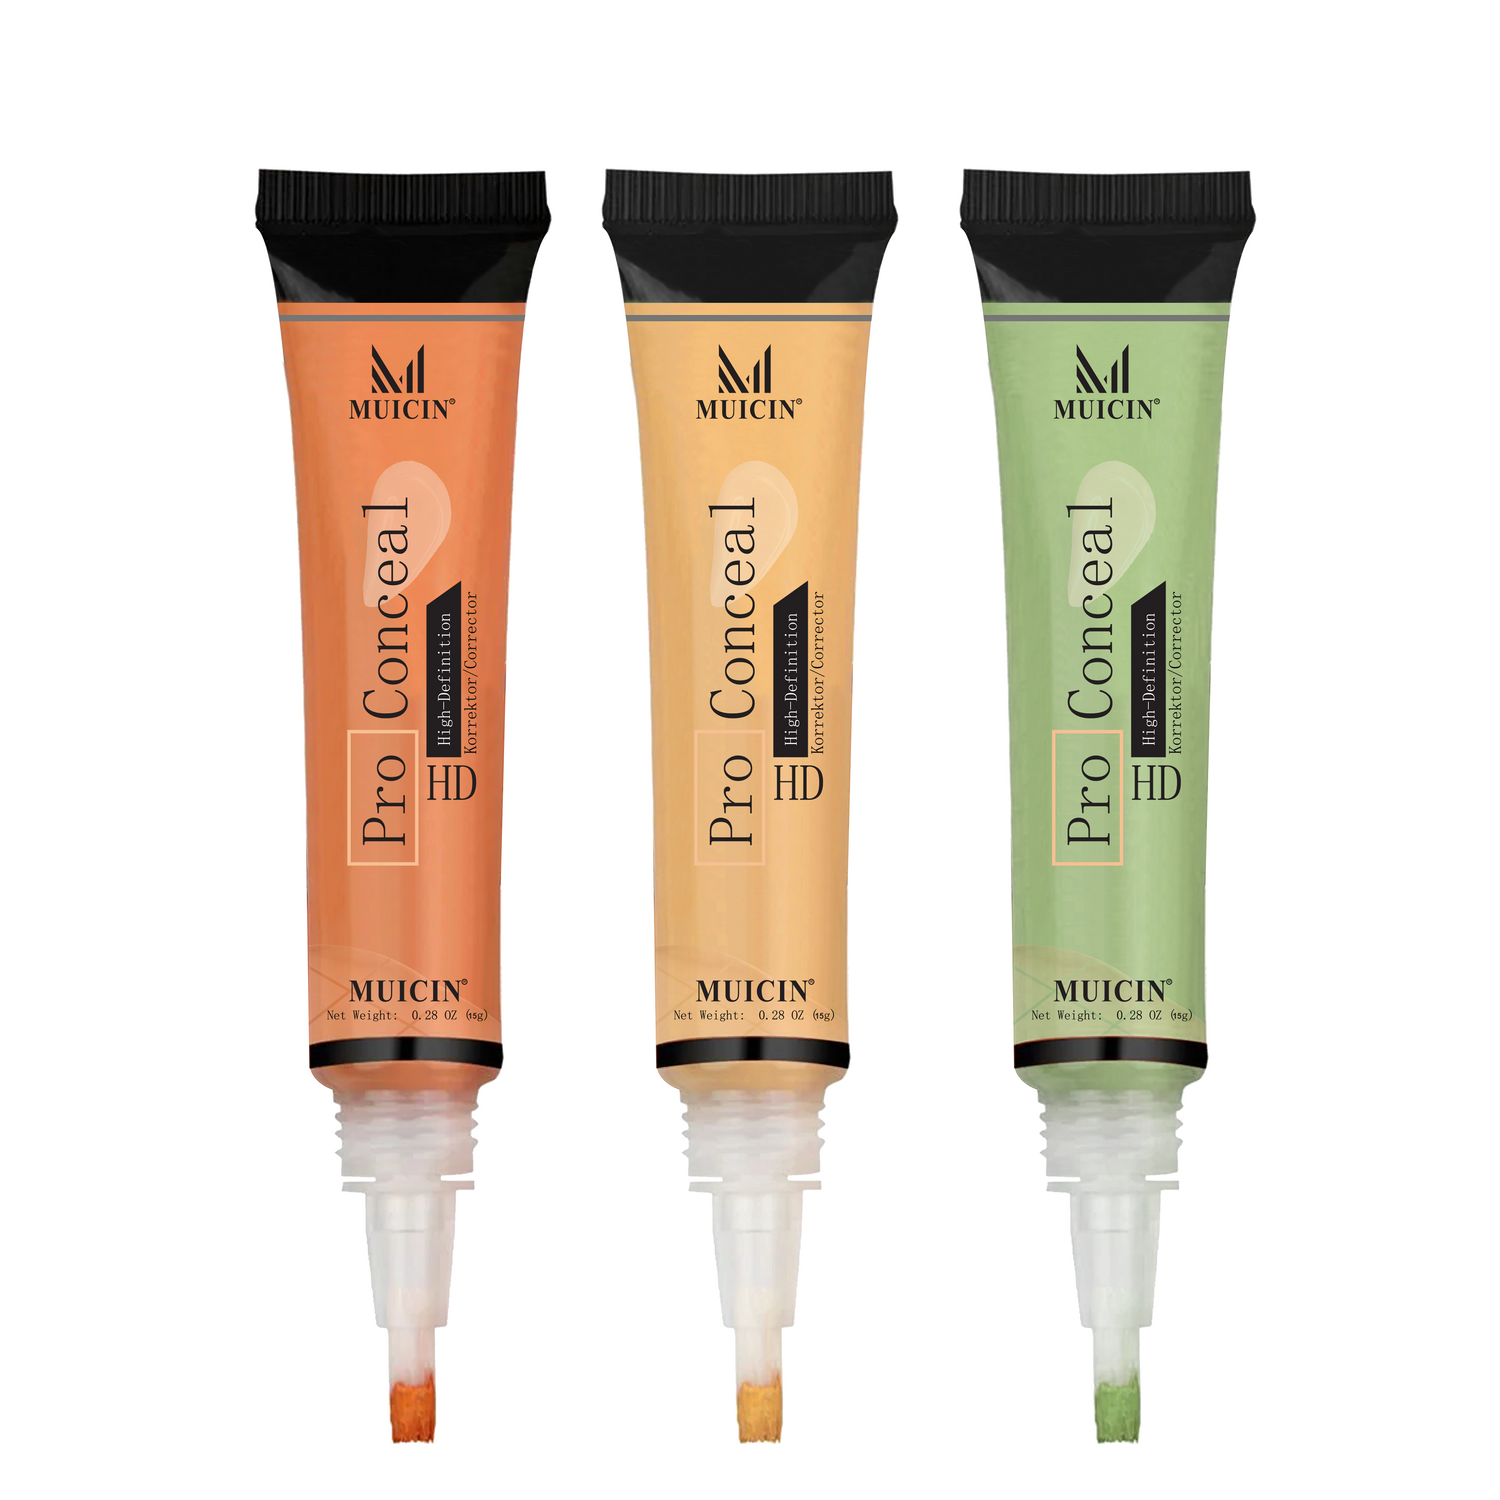 HD PRO CONCEALER CORRECTOR - FLAWLESS CORRECTION